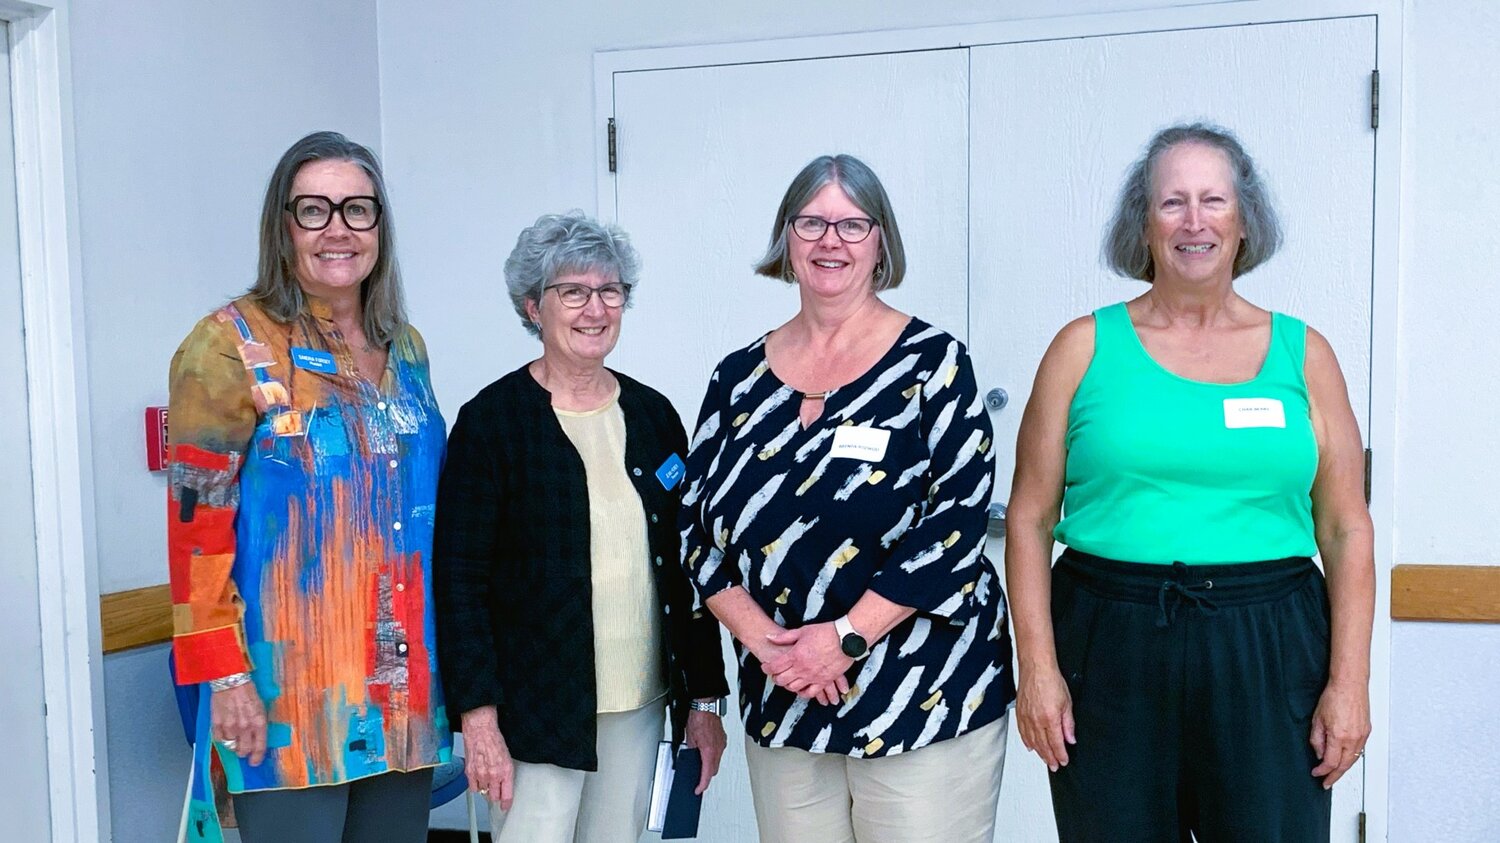 The 2024 election of officers for the Sun City West Waterfitness Club took place at the club’s meeting Nov. 14. The newly elected officers are, from left, President Sandra Forsey, Vice President Jean Heinen, Treasurer Brenda Rozwod and Secretary Char Berry.